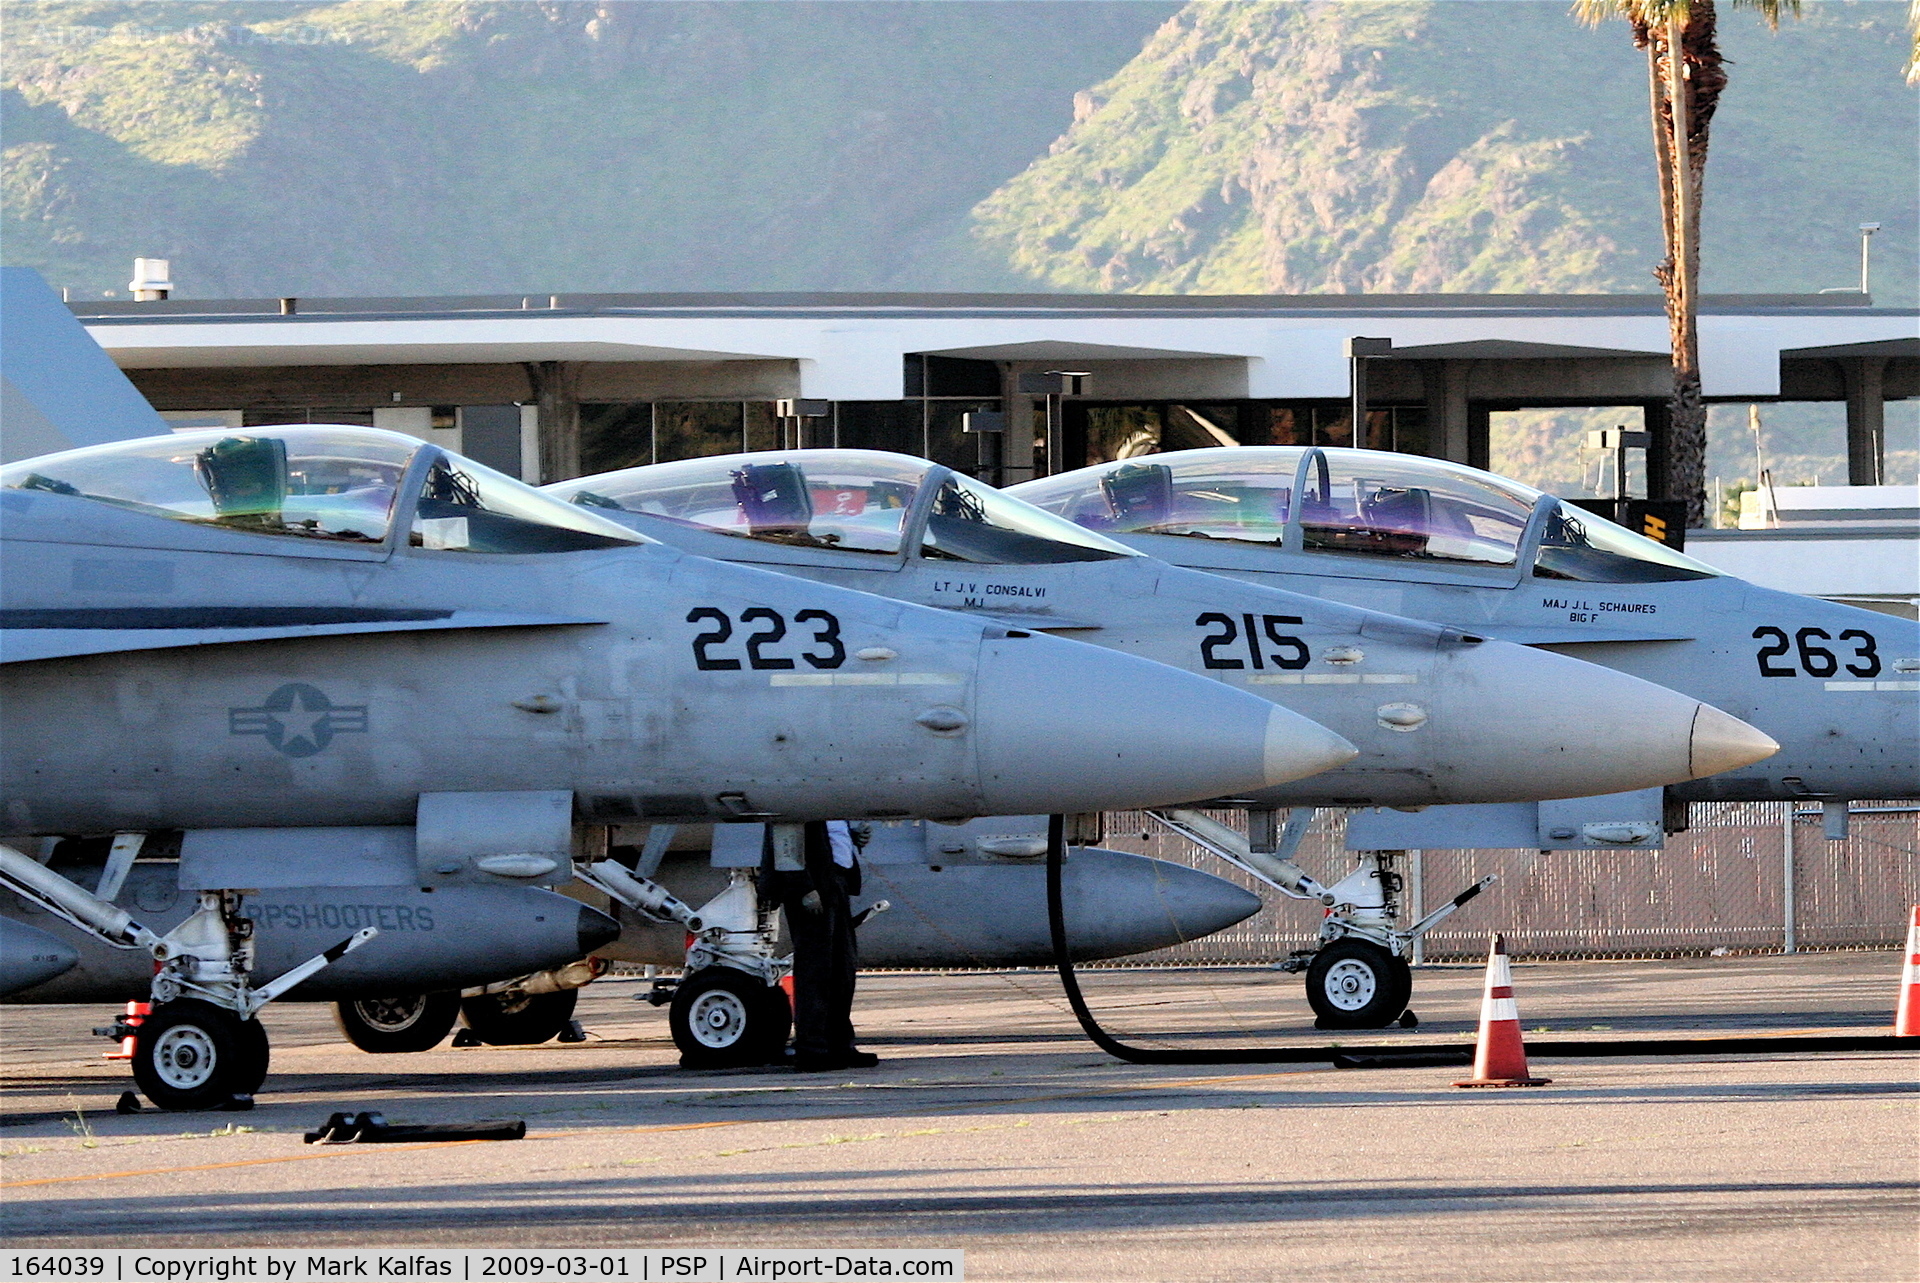 164039, 1990 McDonnell Douglas F/A-18C Hornet C/N 0926/C173, F-18 VMFAT/101-263,223 and 215